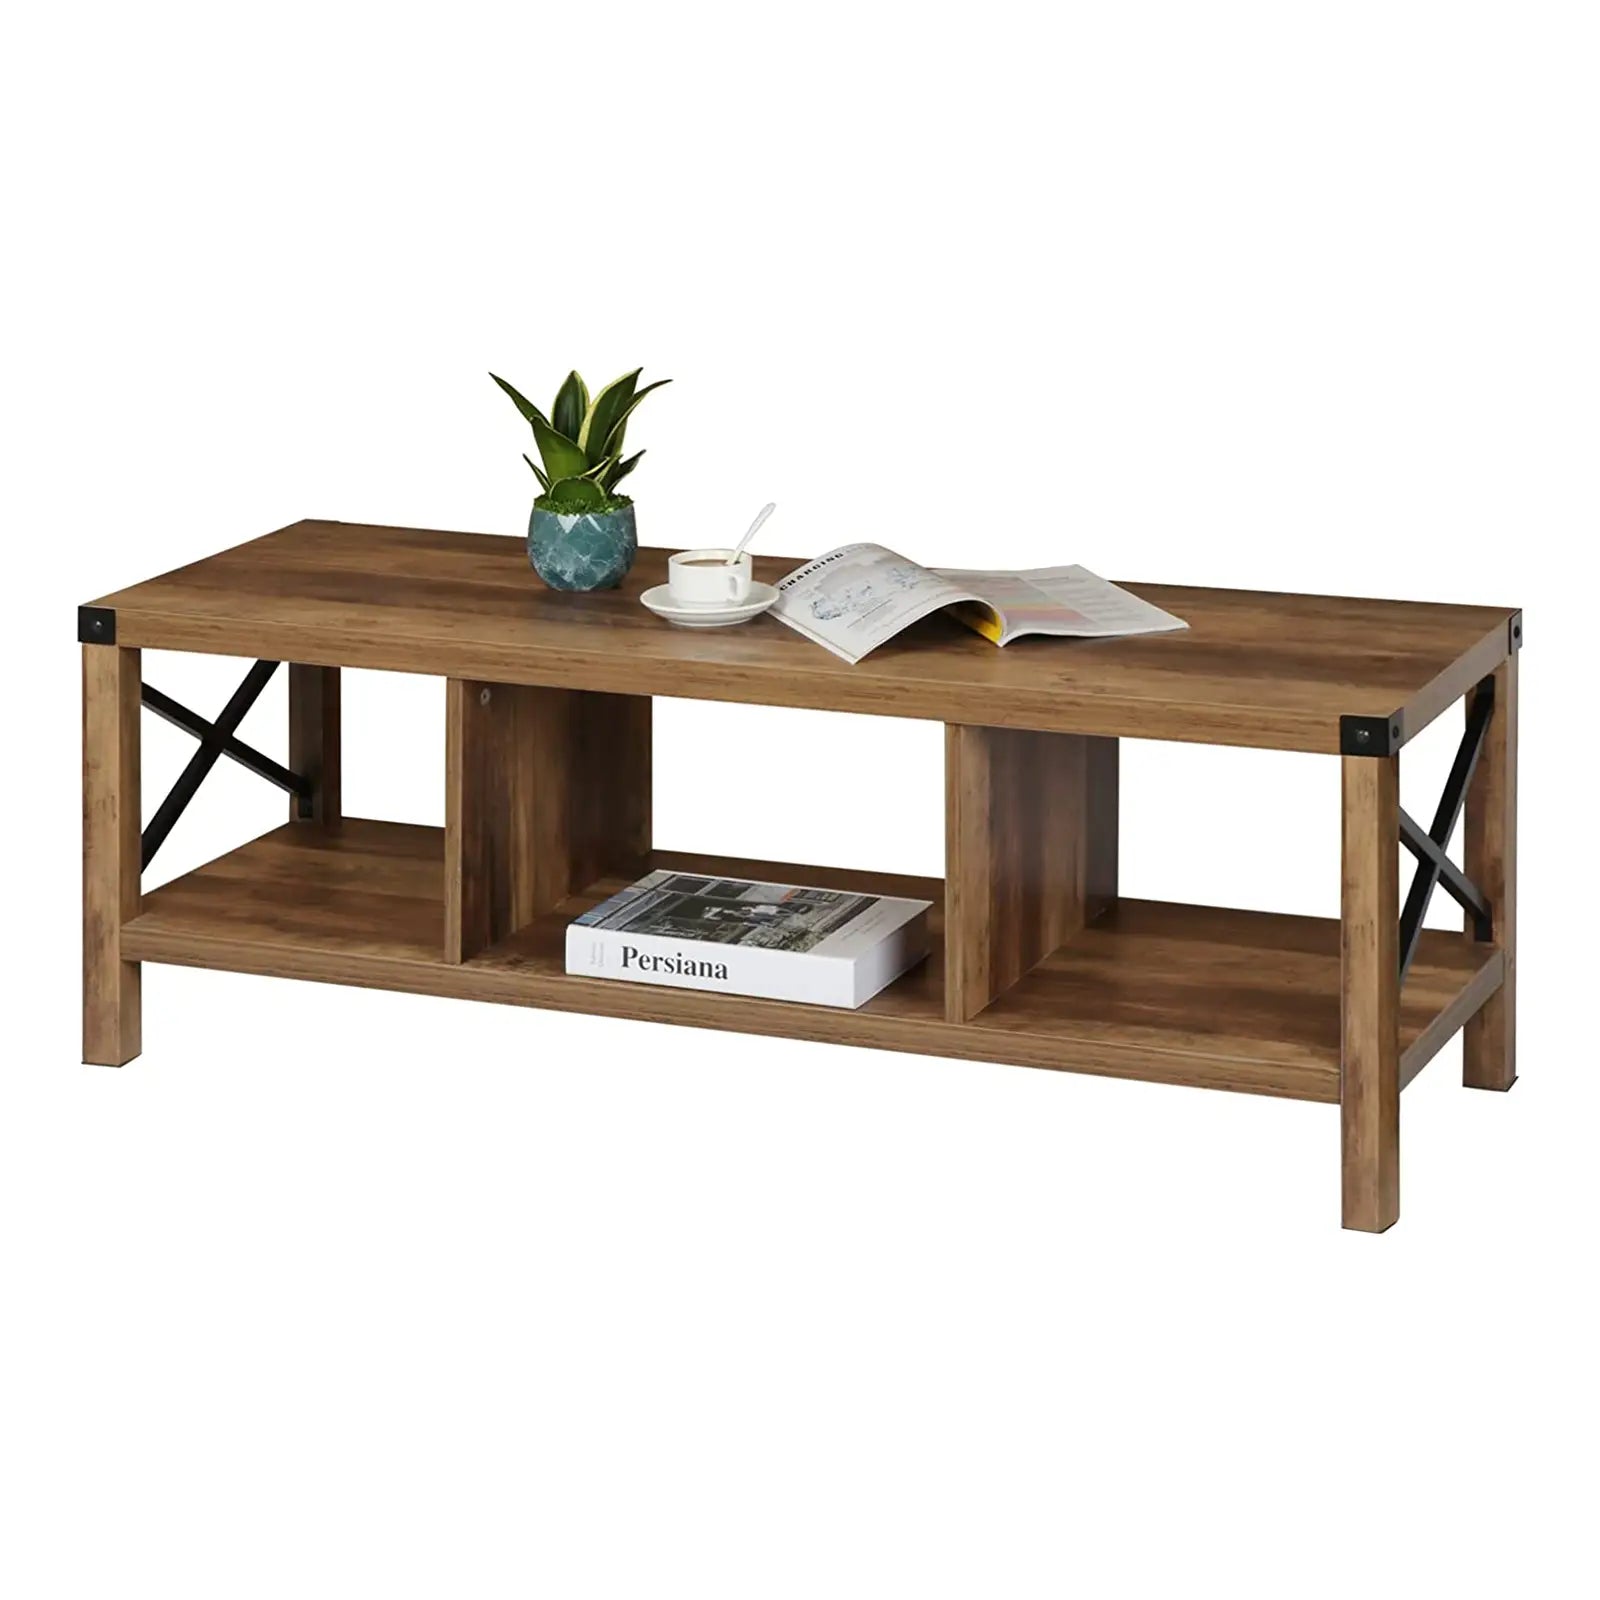 Farmhouse Wooden Coffee Table with Open Storage Shelves